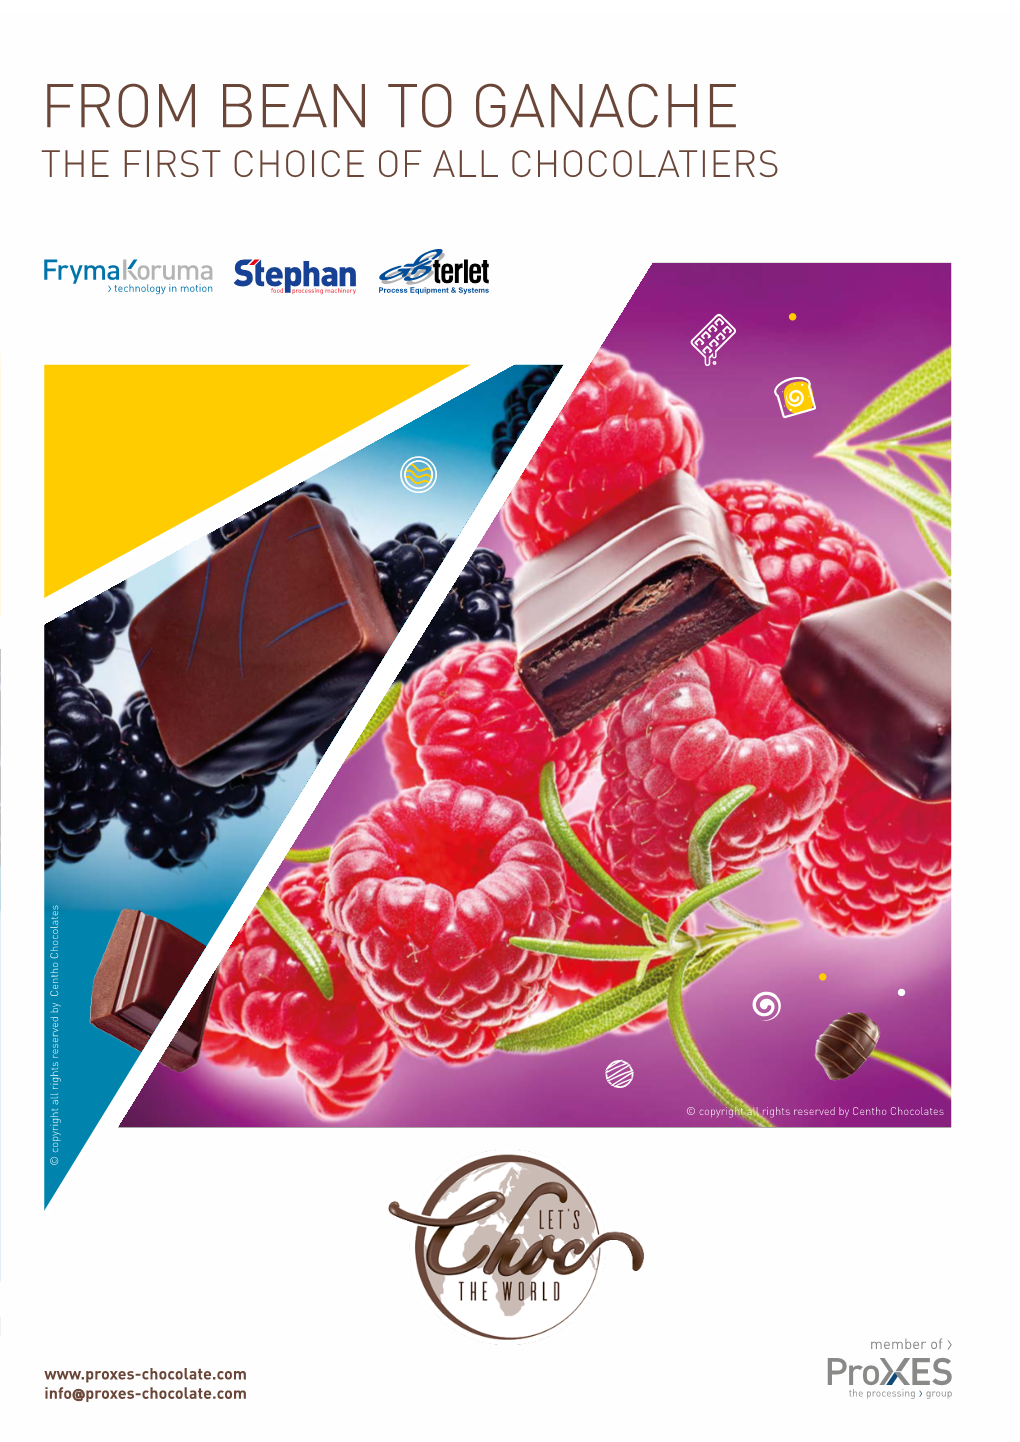 From Bean to Ganache the First Choice of All Chocolatiers from BEAN to GANACHE Worldwide